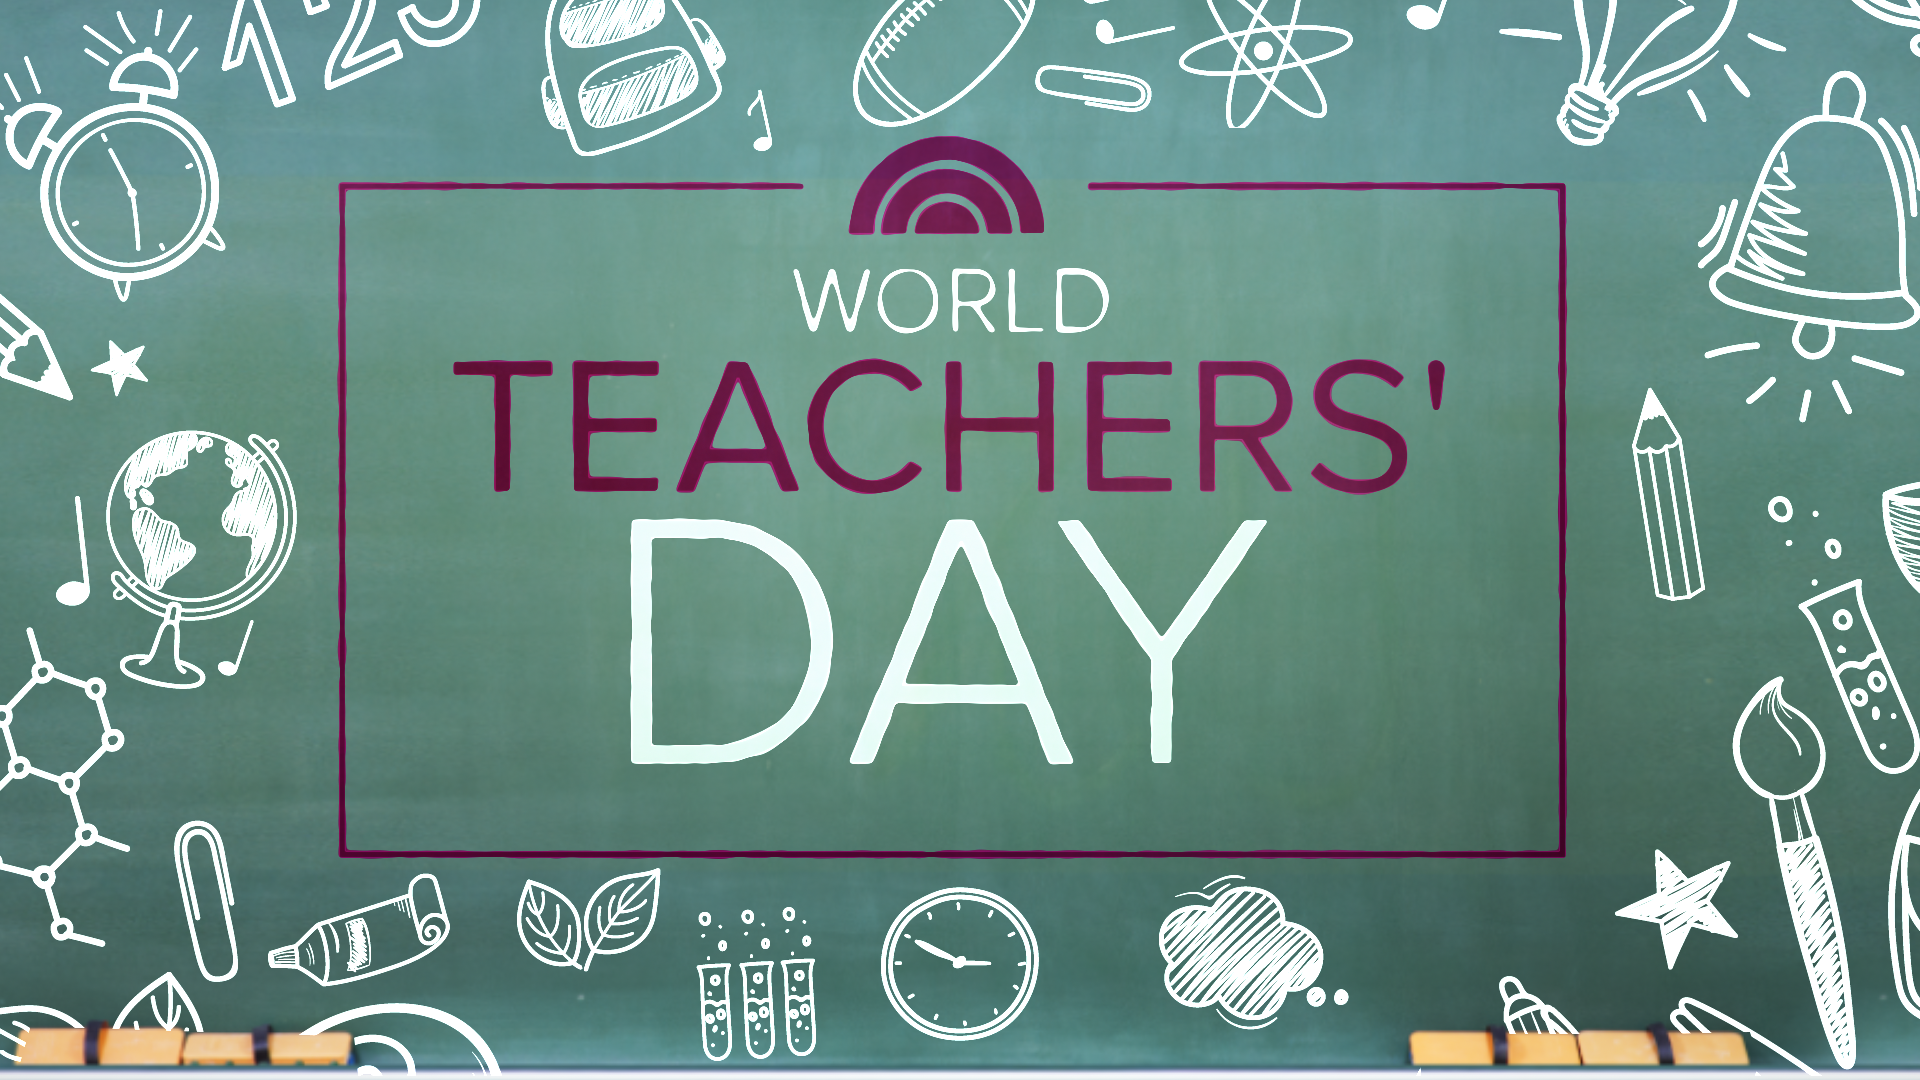 Calling all teachers! We want to celebrate you!